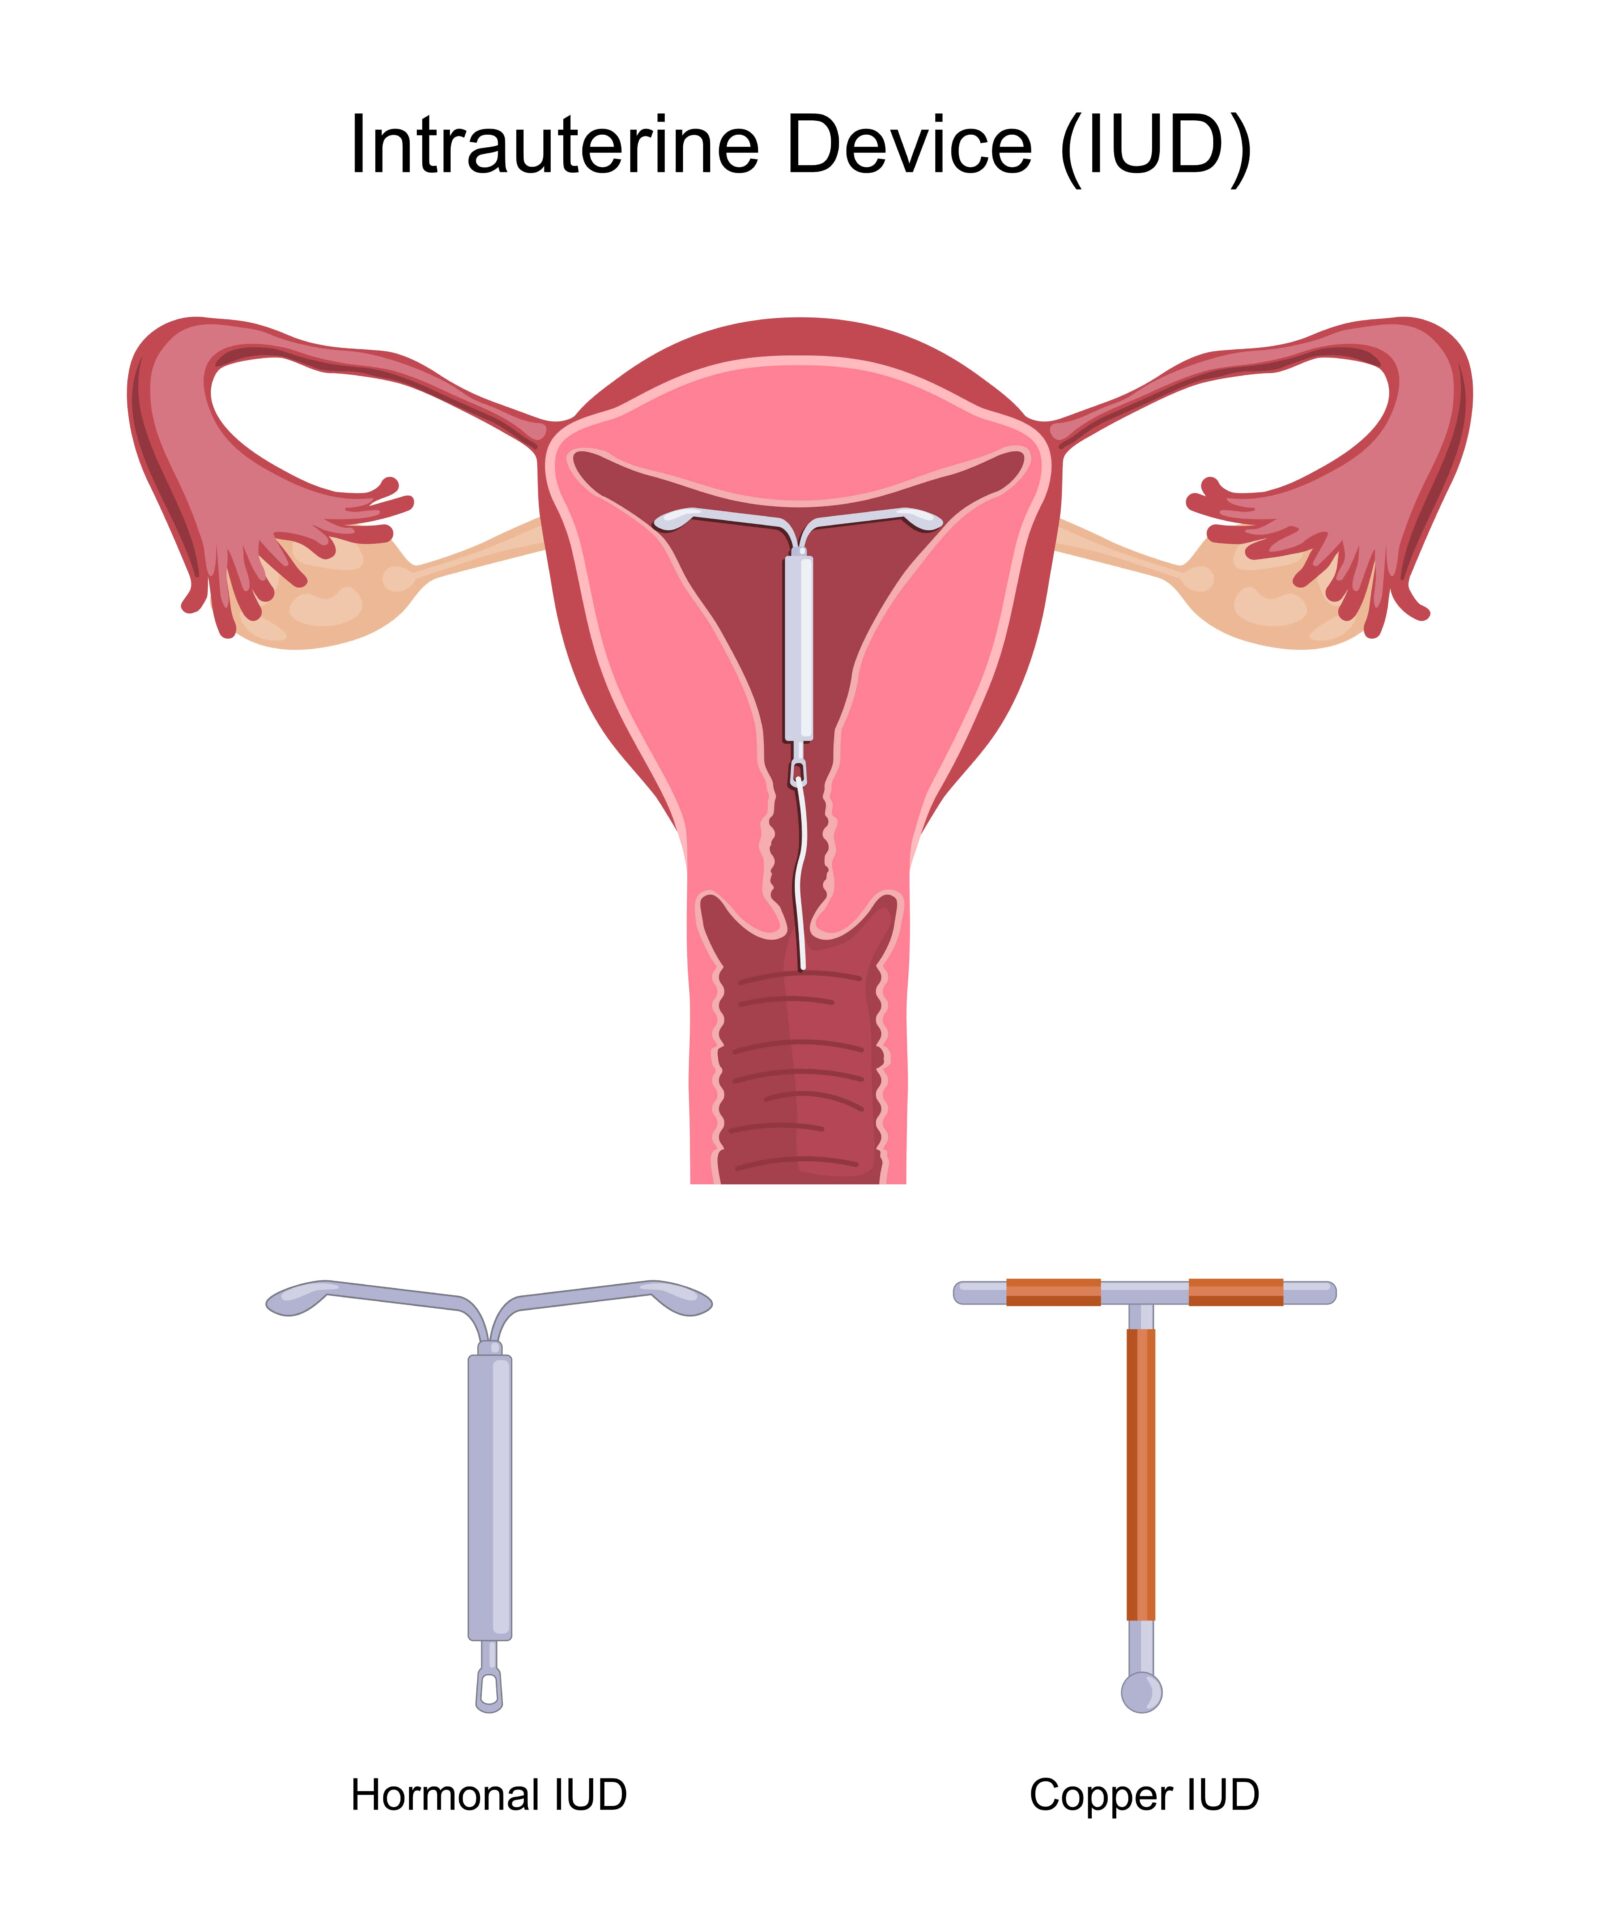 different types of intrauterine devices (IUDs)